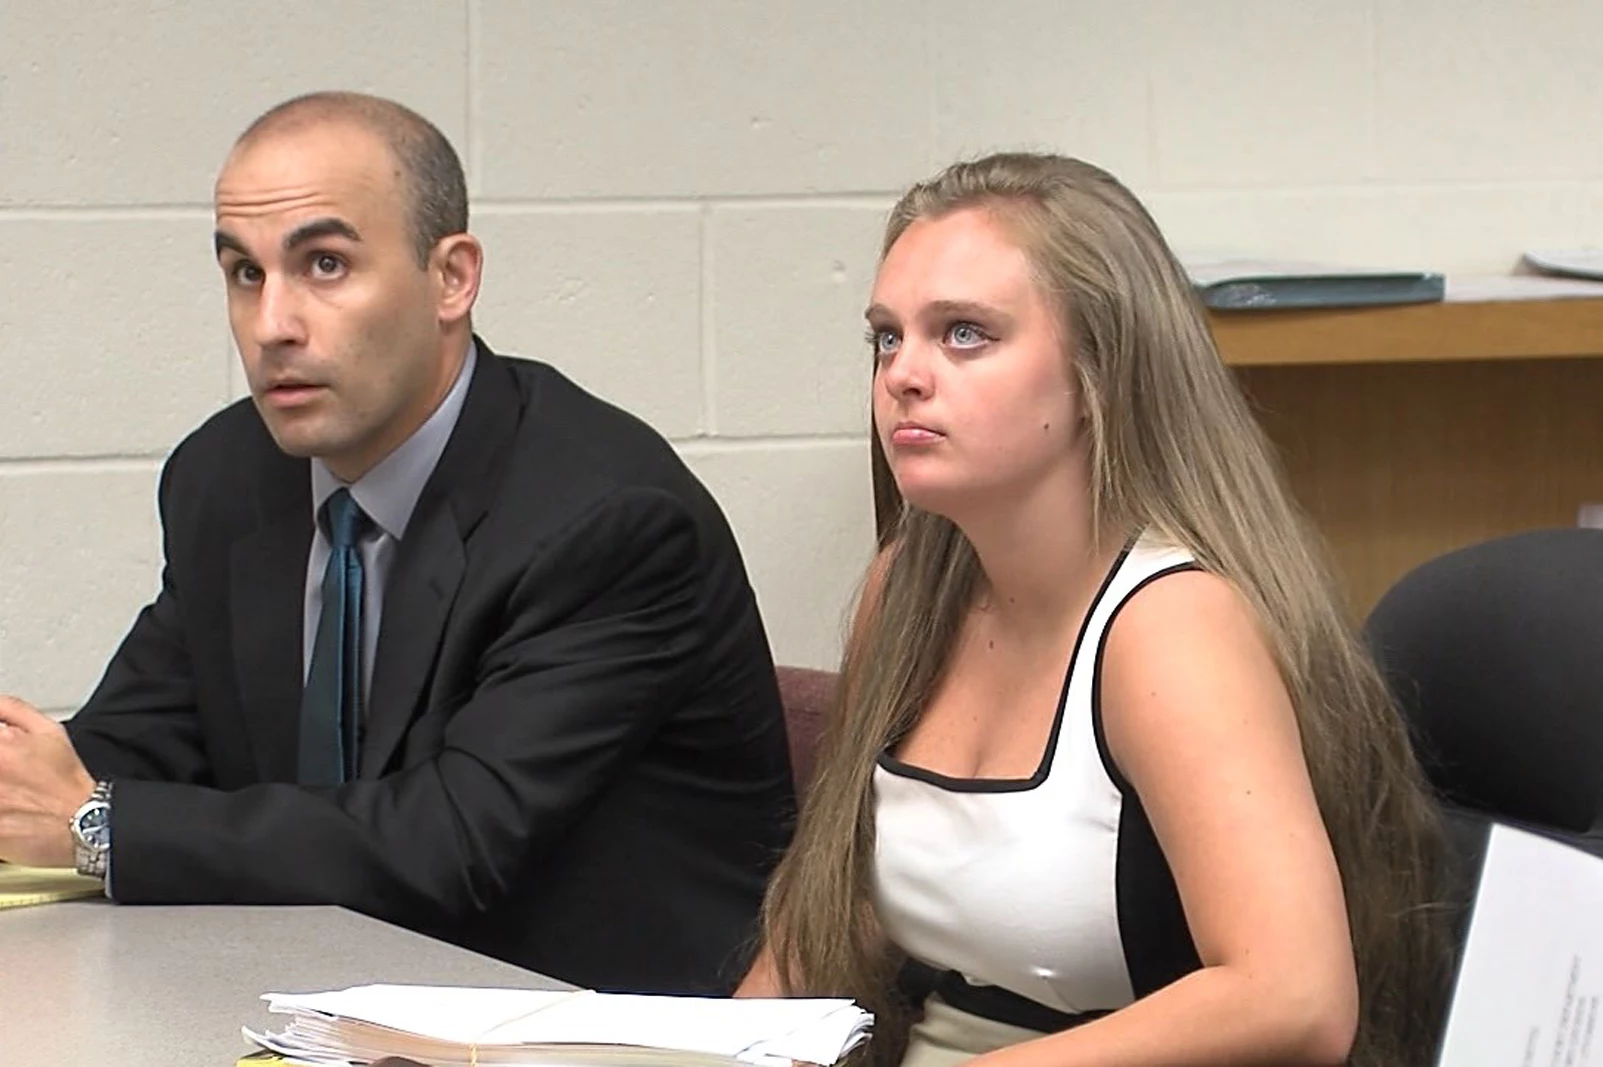 Jury Selection Begins in Michelle Carter Manslaughter Trial1603 x 1067